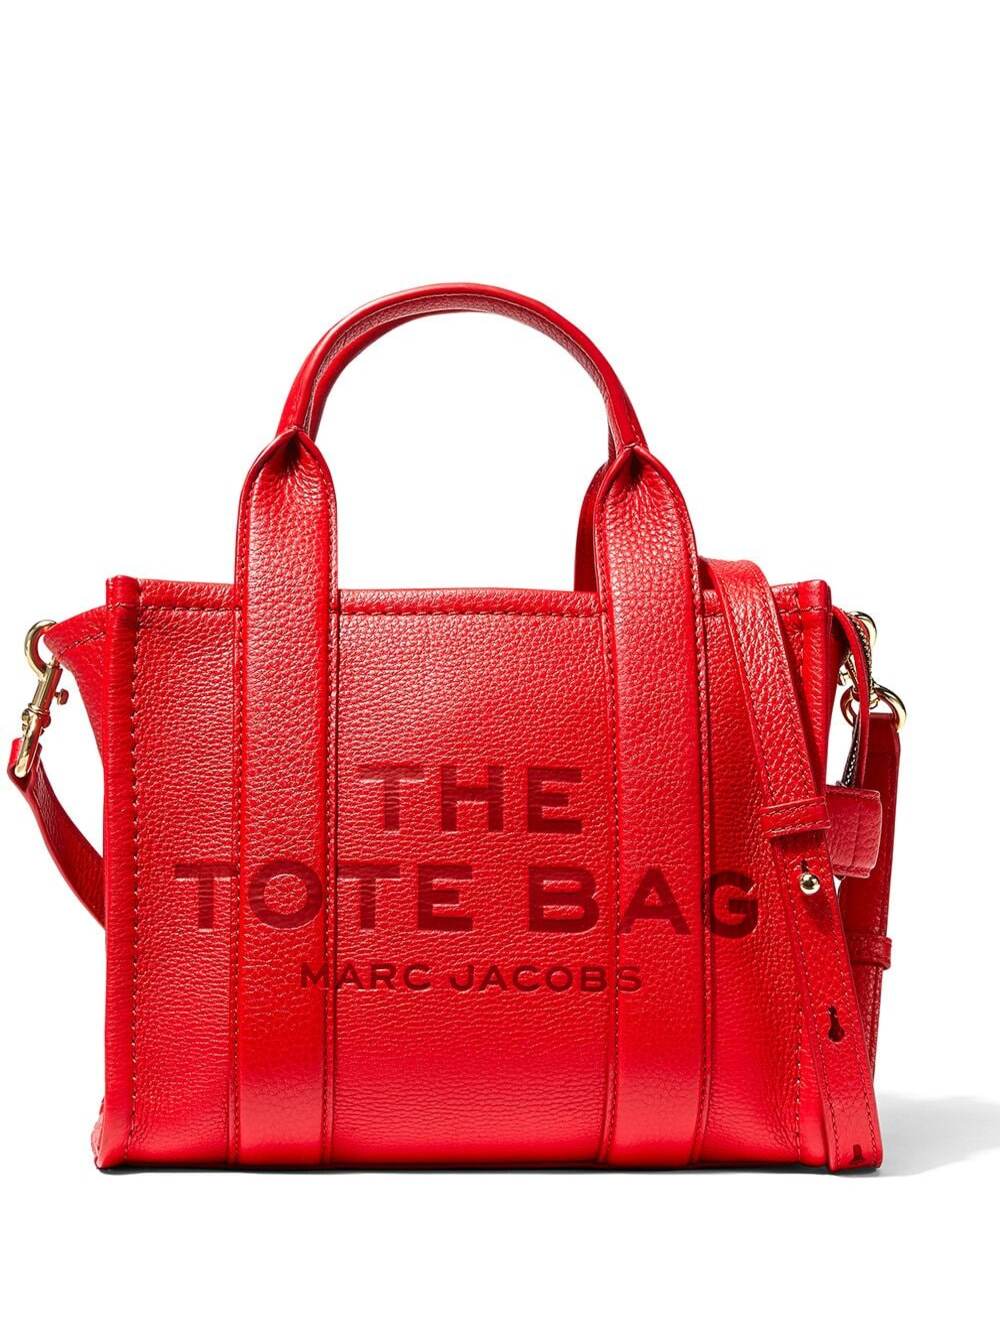 Marc Jacobs the Mini Tote Bag Red Shoulder Bag With Logo In Grainy Leather Woman